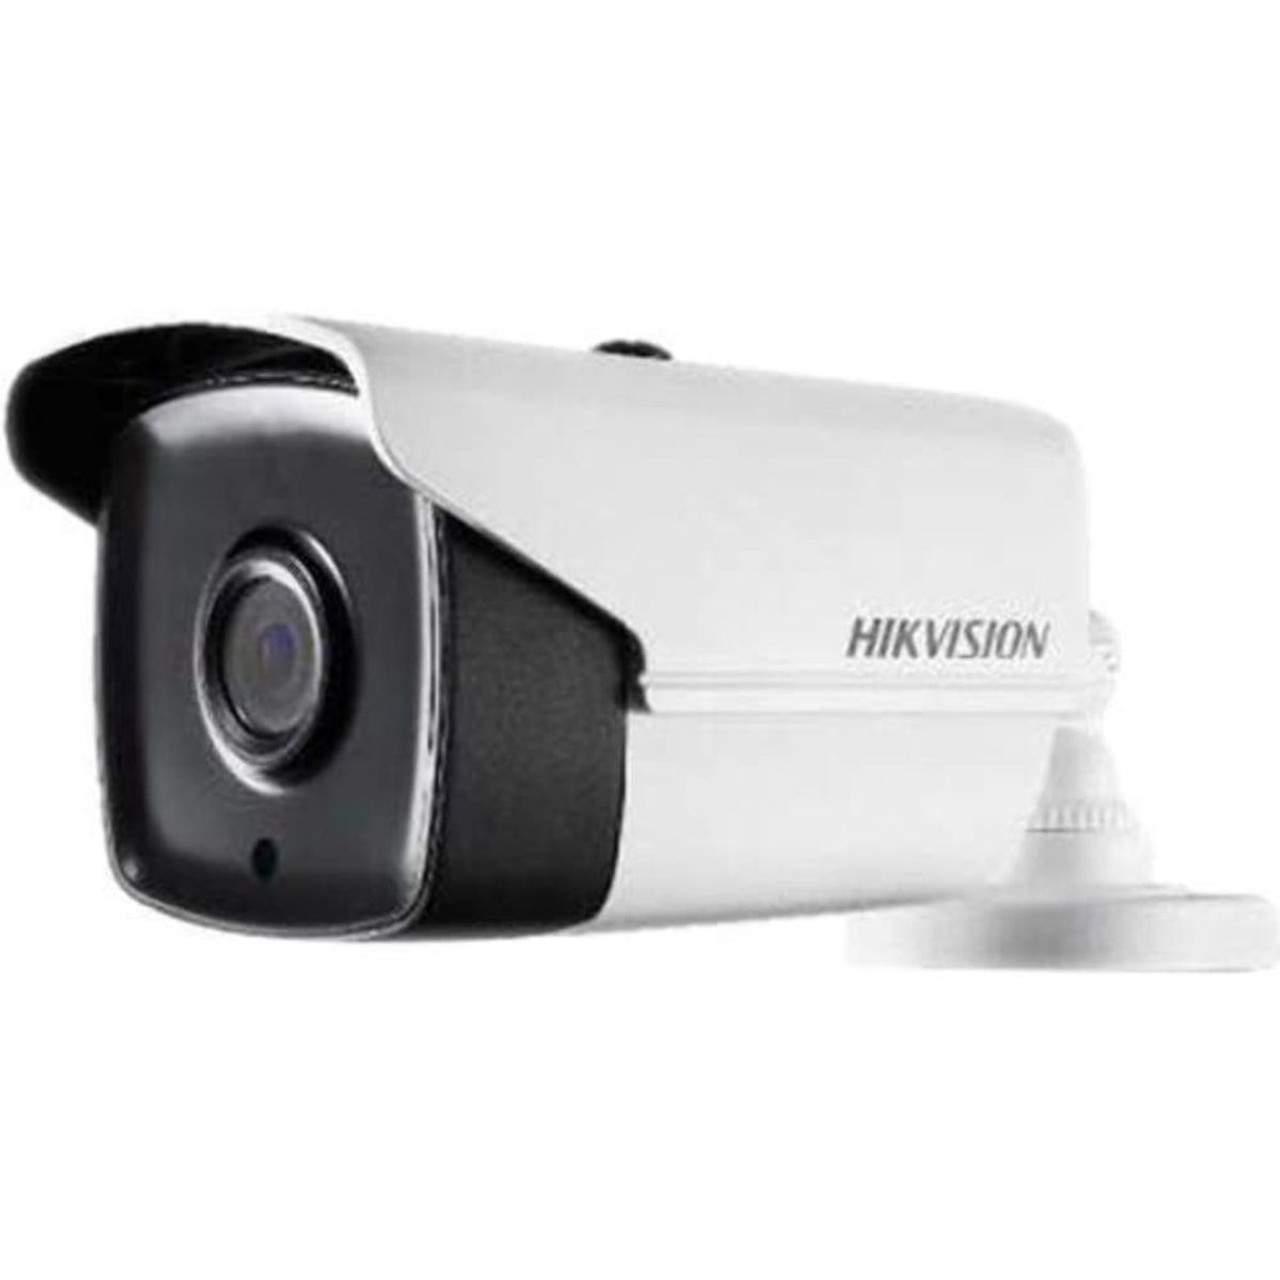 Hikvision 2MP 1080p 2.8mm Outdoor Surveillance Security Camera product image